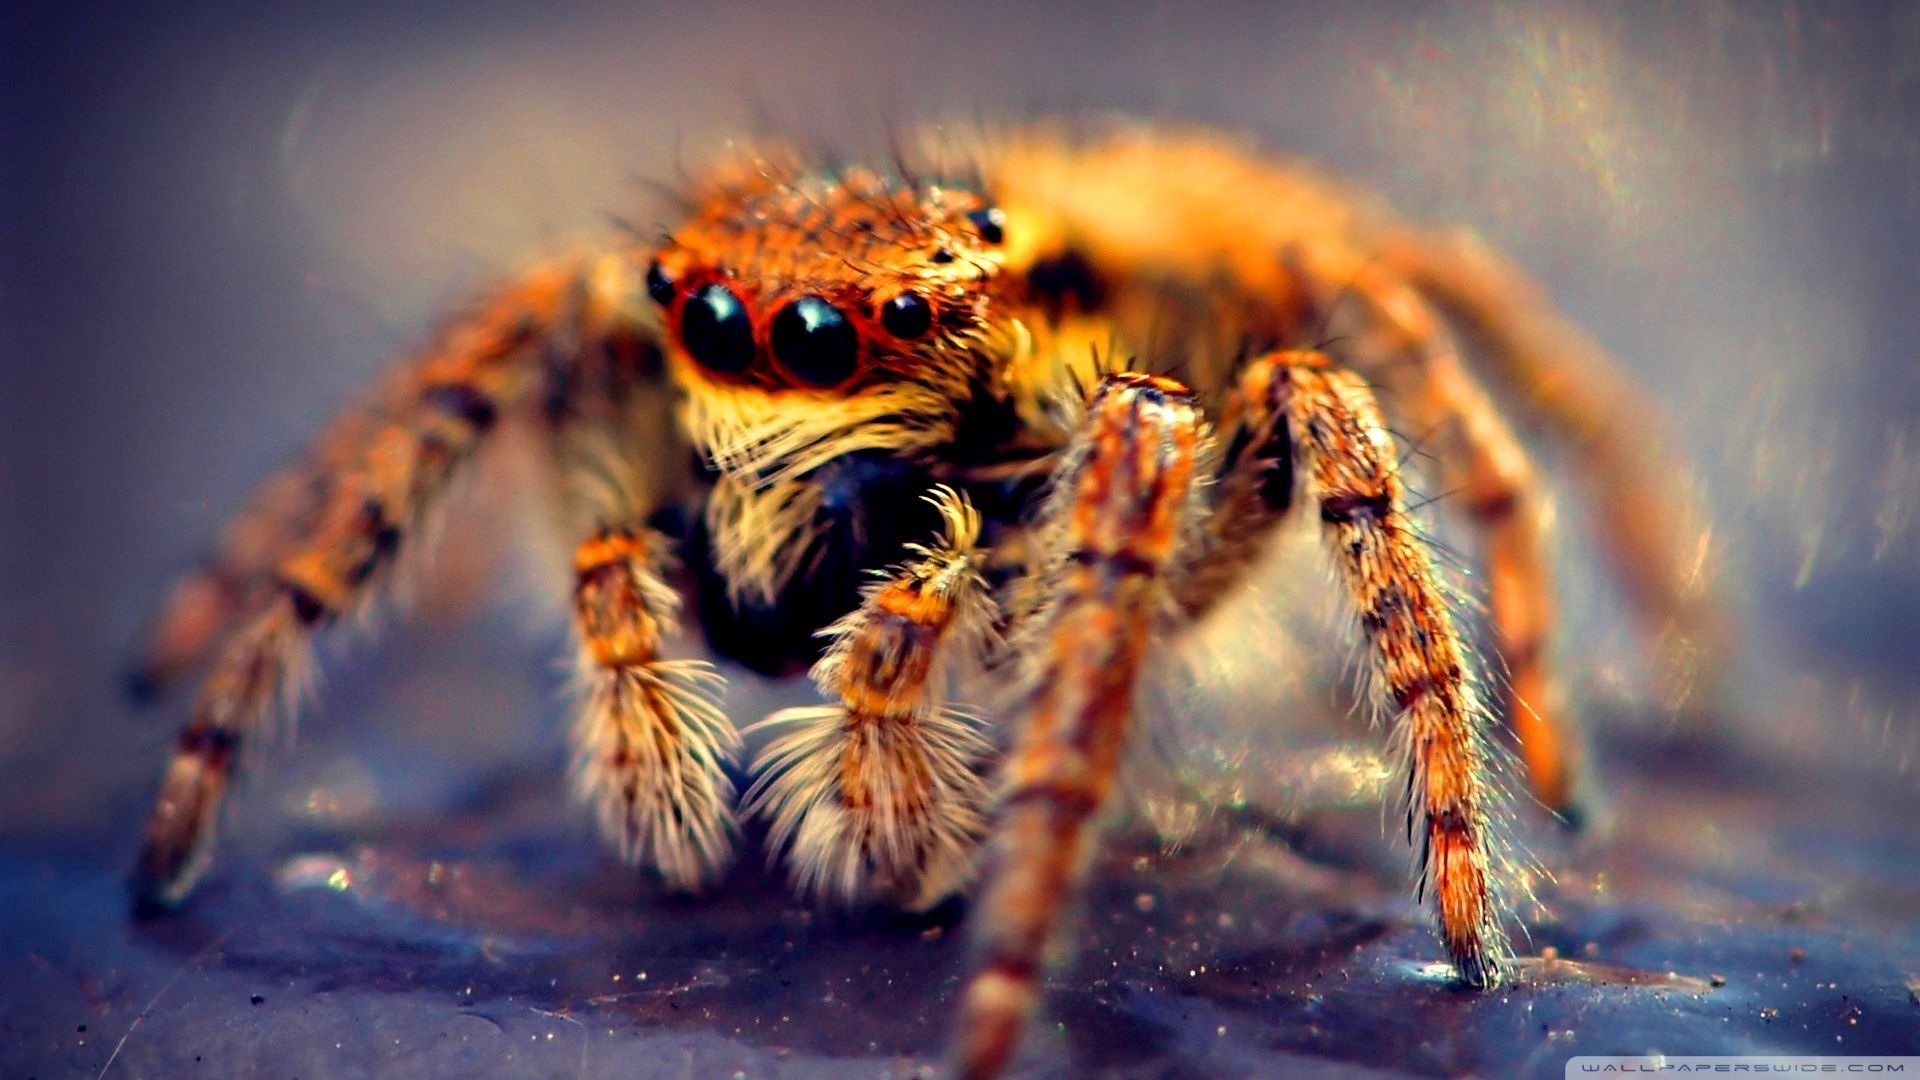 Spider, Insect wallpapers, Arachnid beauty, Natural fascination, 1920x1080 Full HD Desktop